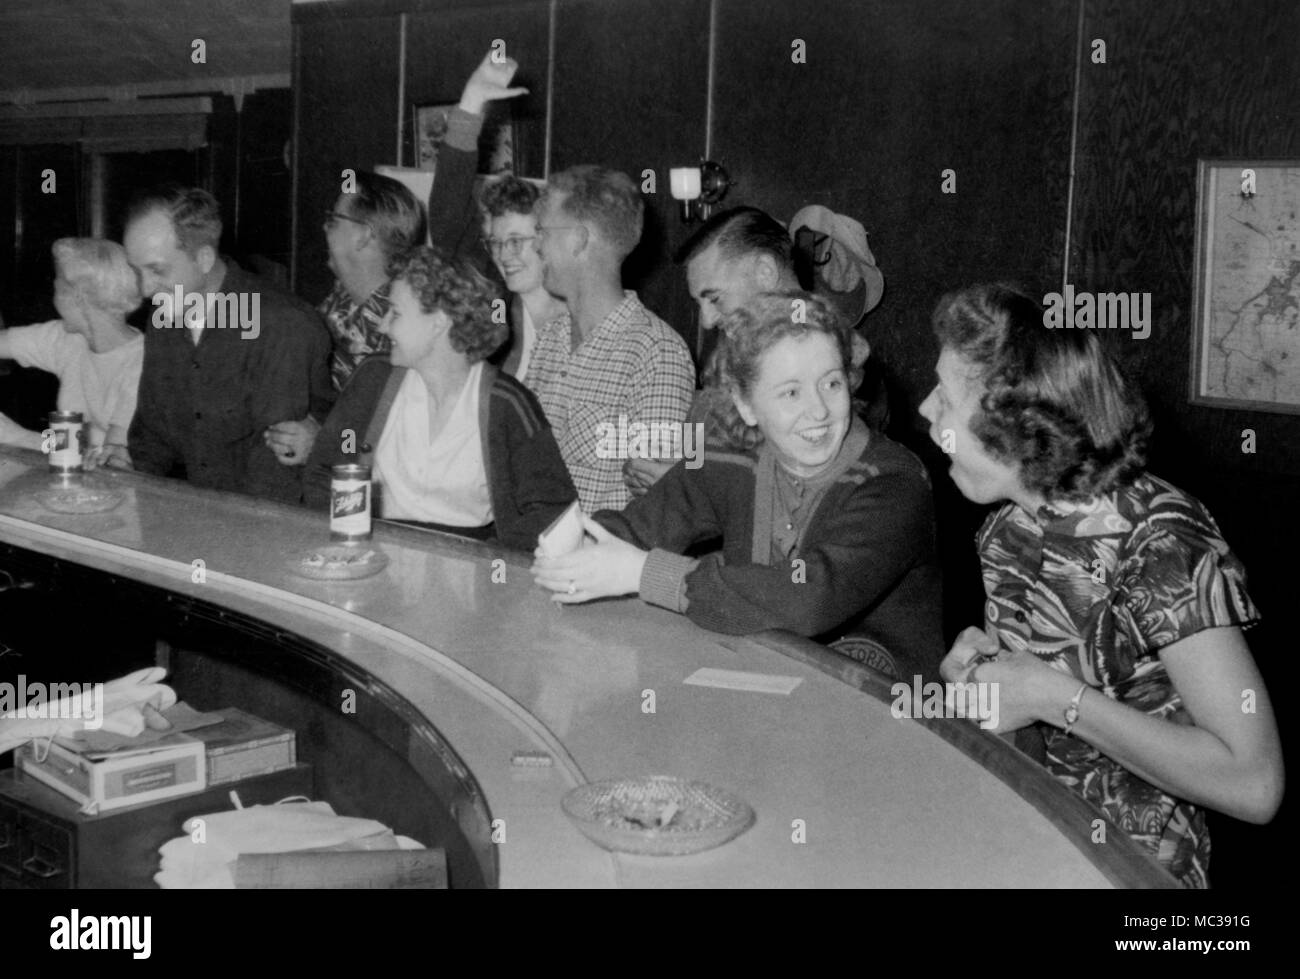 A crowd at a Chicago bar, ca. 1955. Stock Photo